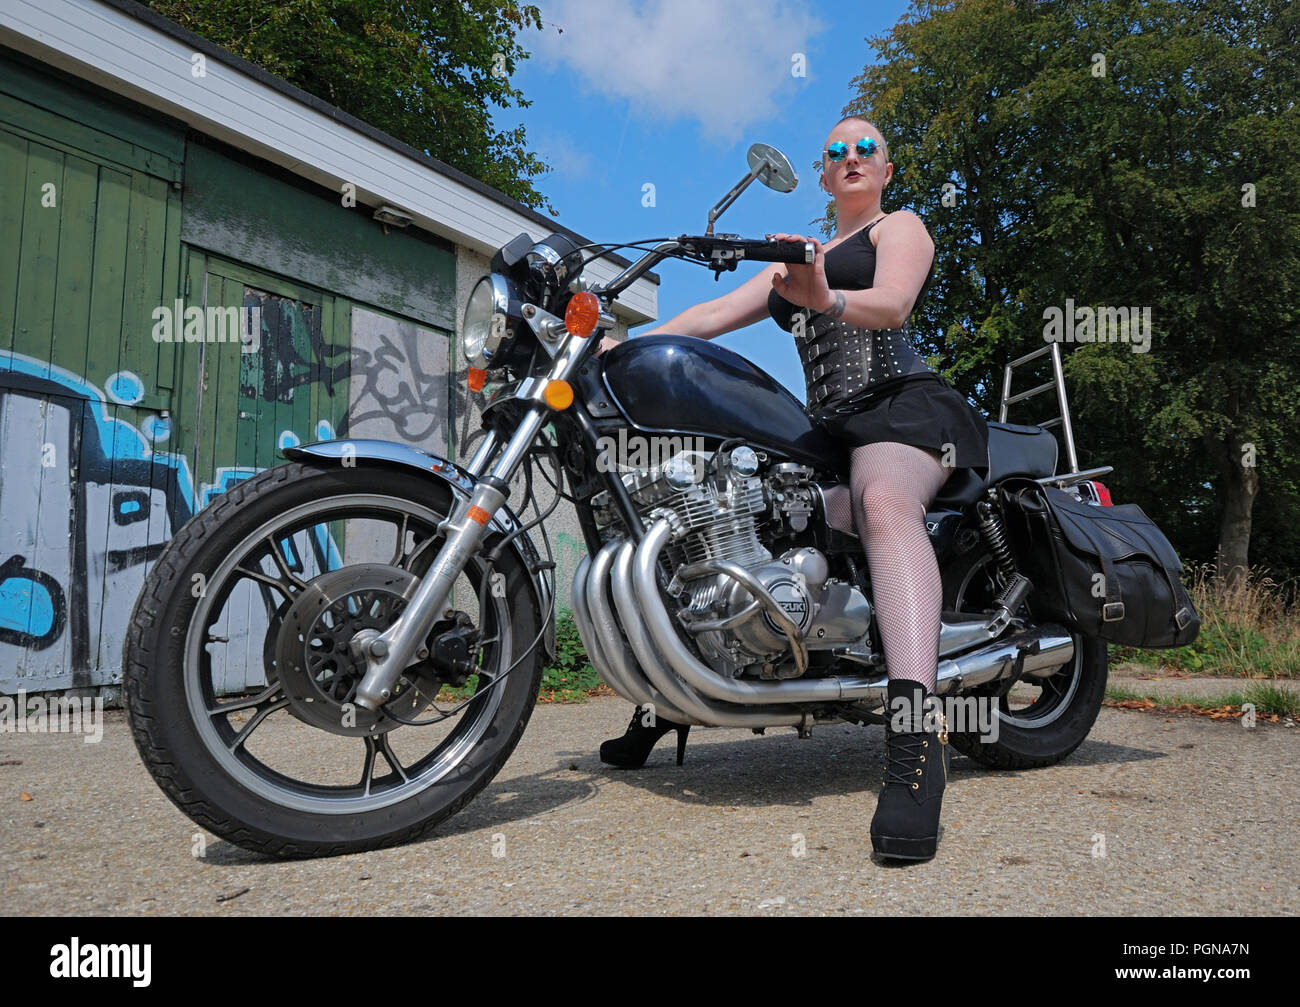 Model Rosa Fury straddles a classic Suzuki motorcycle in front of a graffiti covered wall. She's wearing a short black dress with a corset & fishnets. Stock Photo